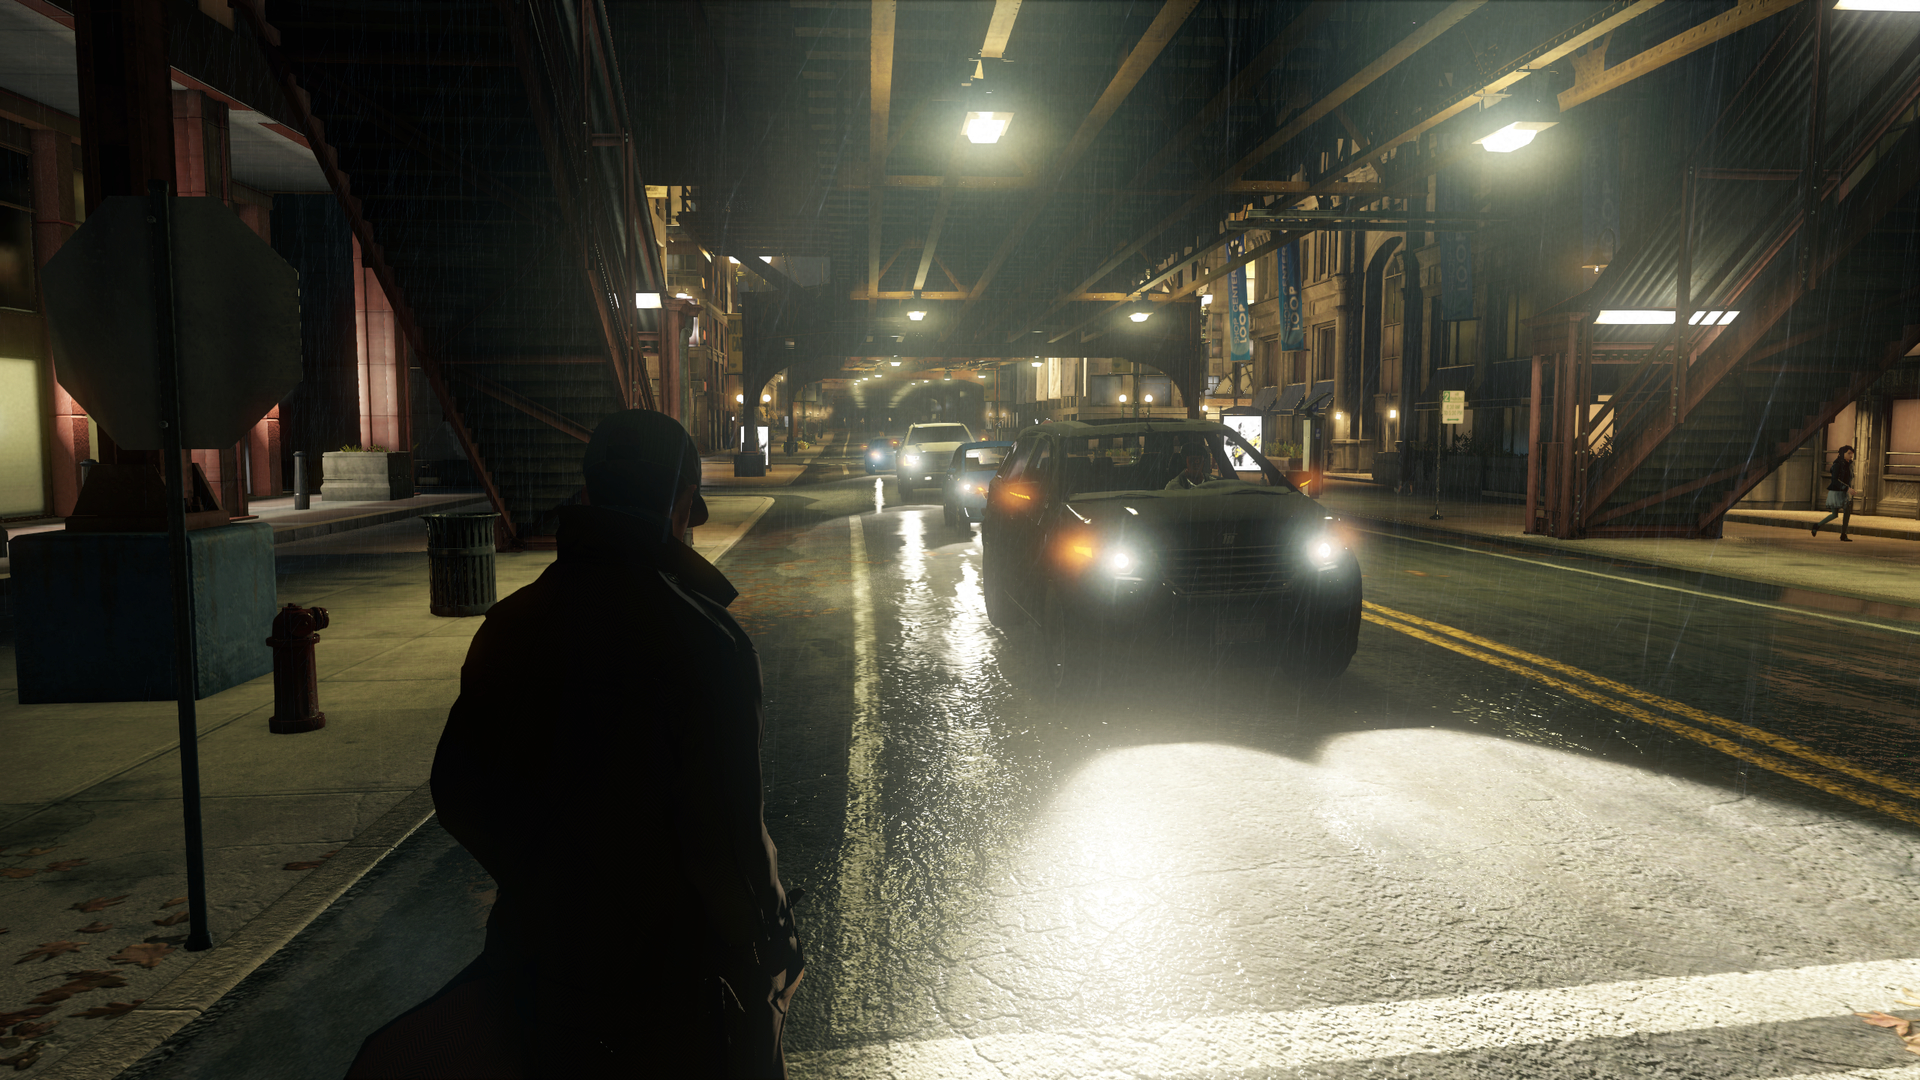 watch_dogs_exe_dx11_20140528_182123_1080p_by_confidence_man-d7k3dfs.jpg